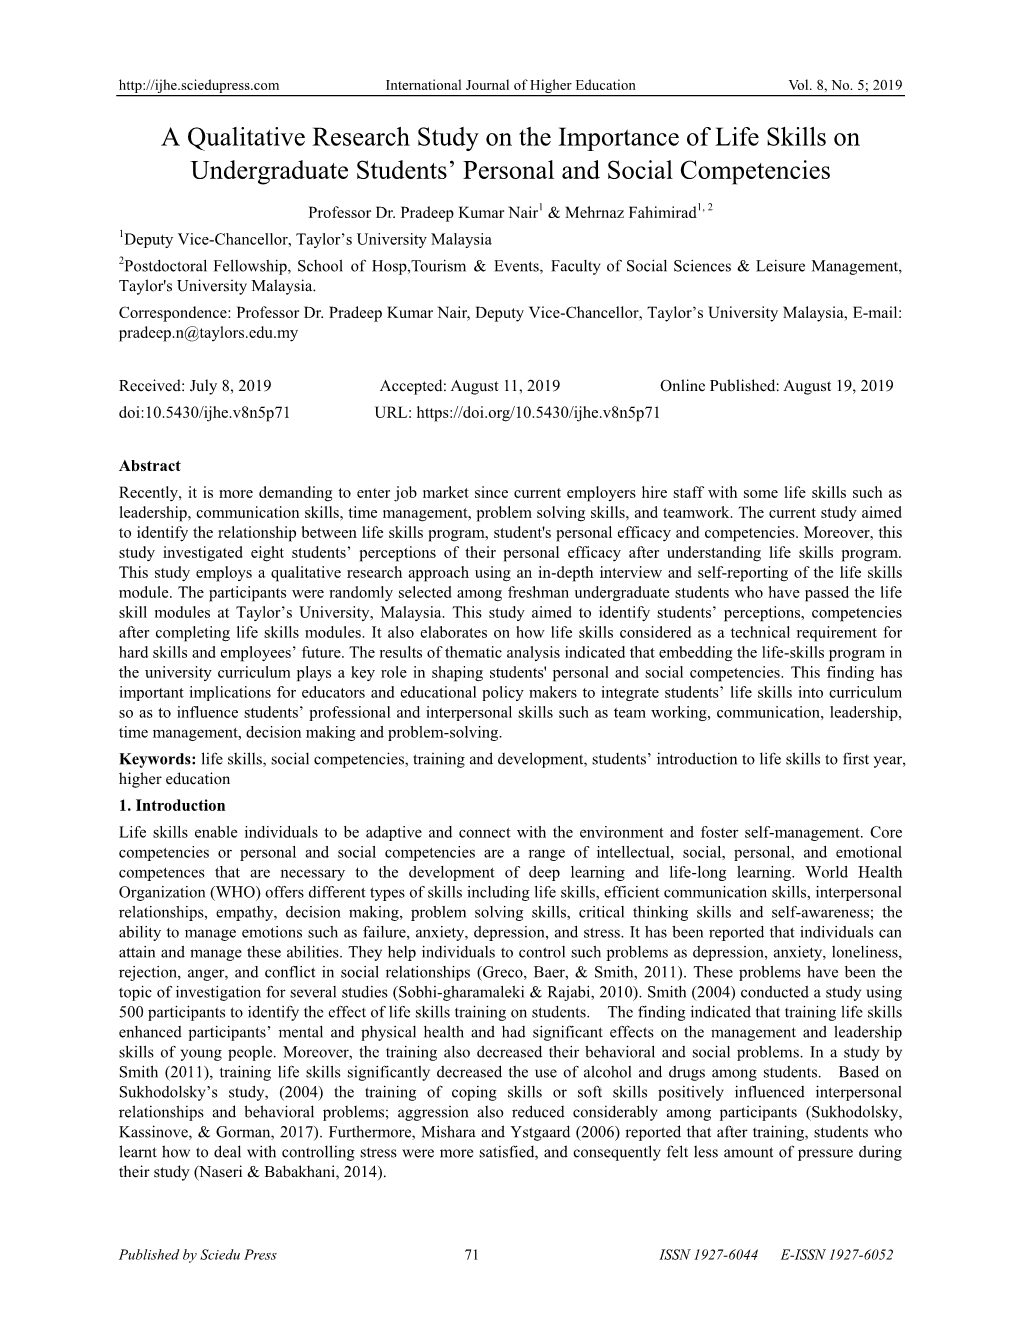 A Qualitative Research Study on the Importance of Life Skills on Undergraduate Students’ Personal and Social Competencies